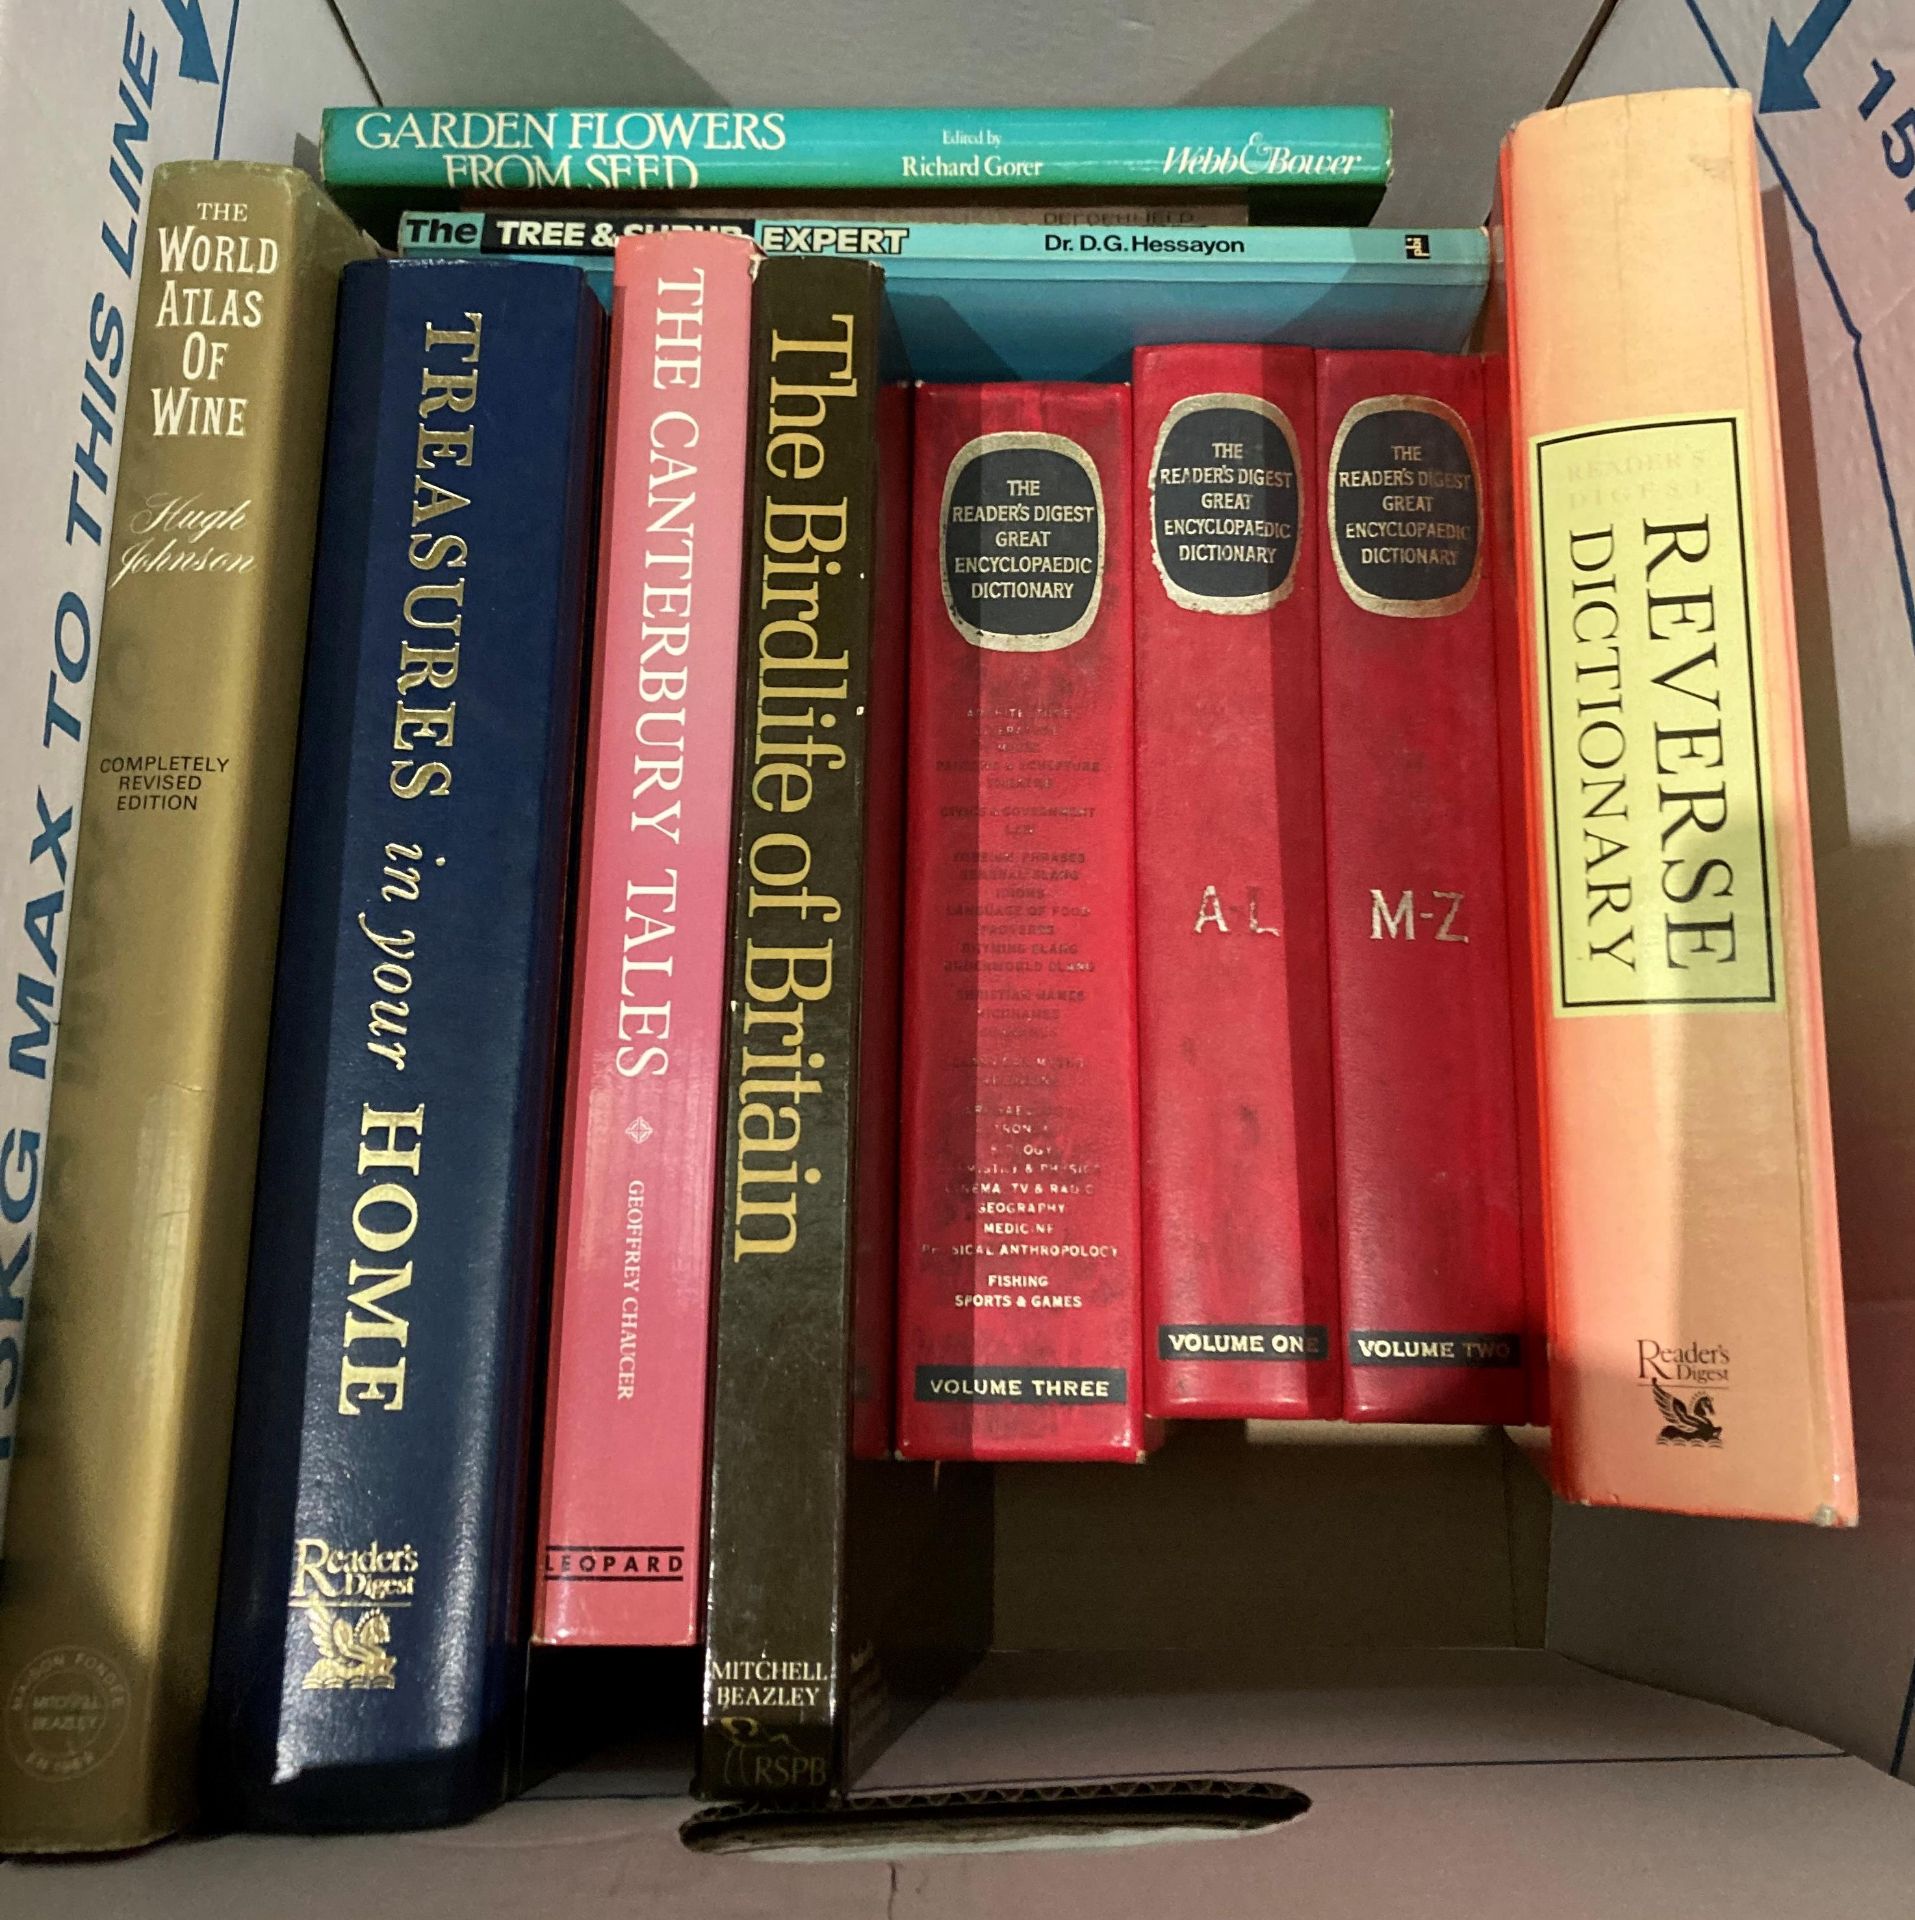 Contents to box - 12 books including 3 volumes 'The Readers Digest Great Encyclopaedic Dictionary',